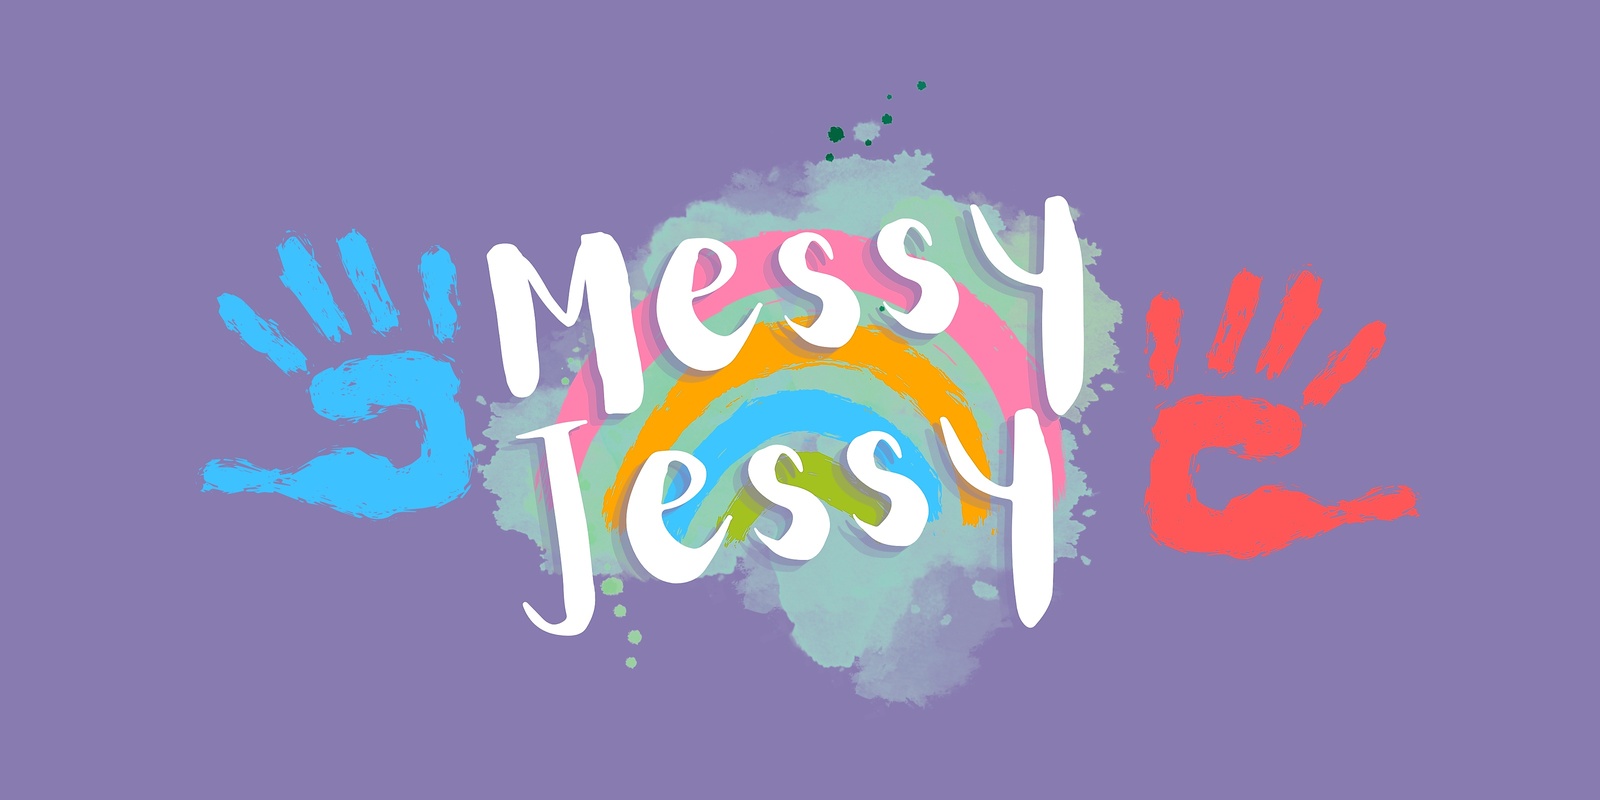 Banner image for Messy Jessy Sensory Monday 9AM